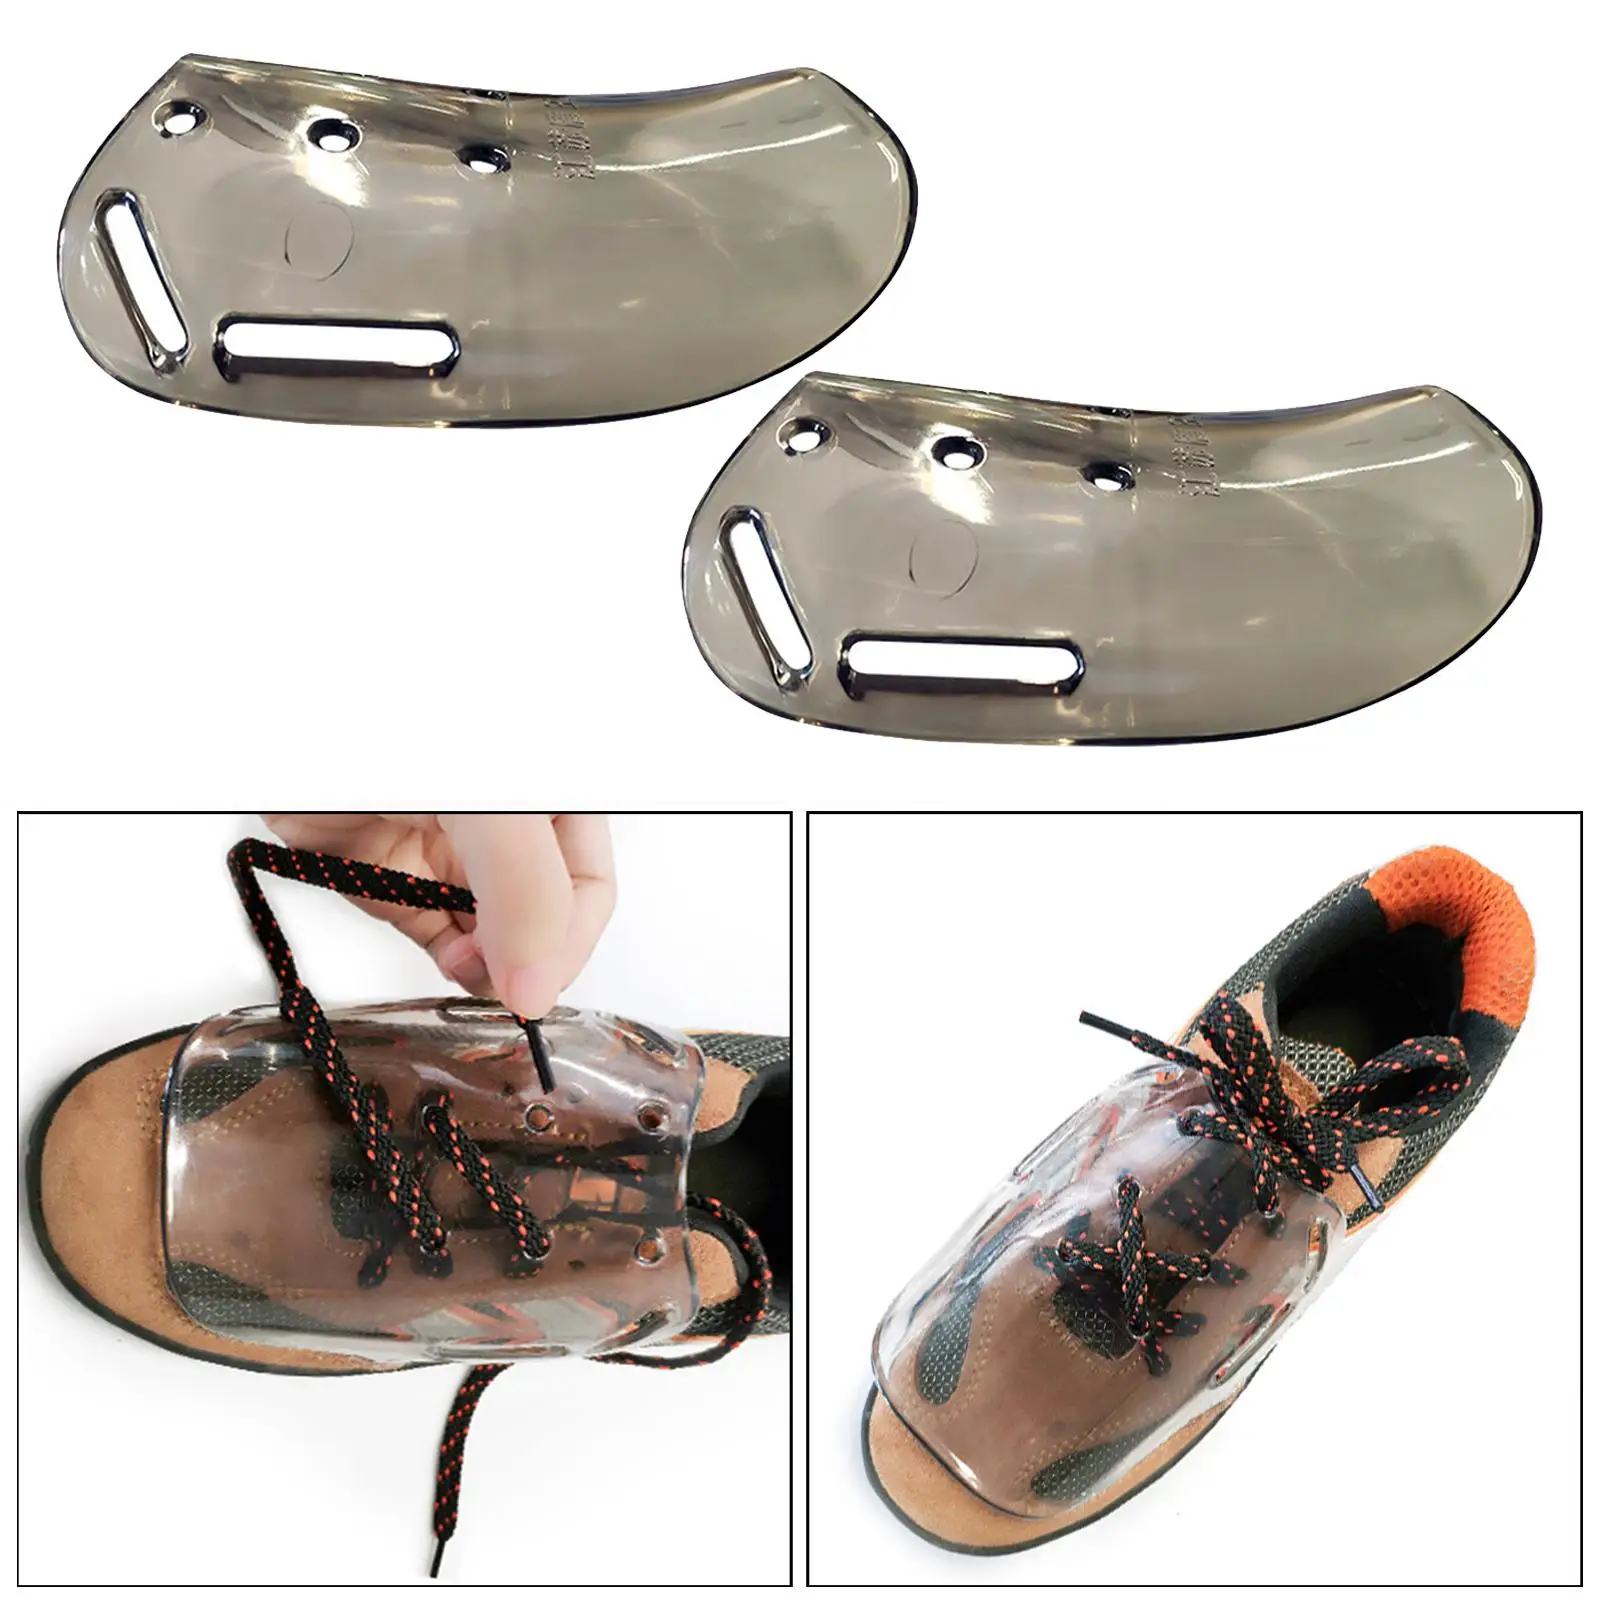 2 Pieces External Metatarsal Guard Protection Heat Insulation ABS Welder Shoe Cover for Automobile Manufacturing Unisex